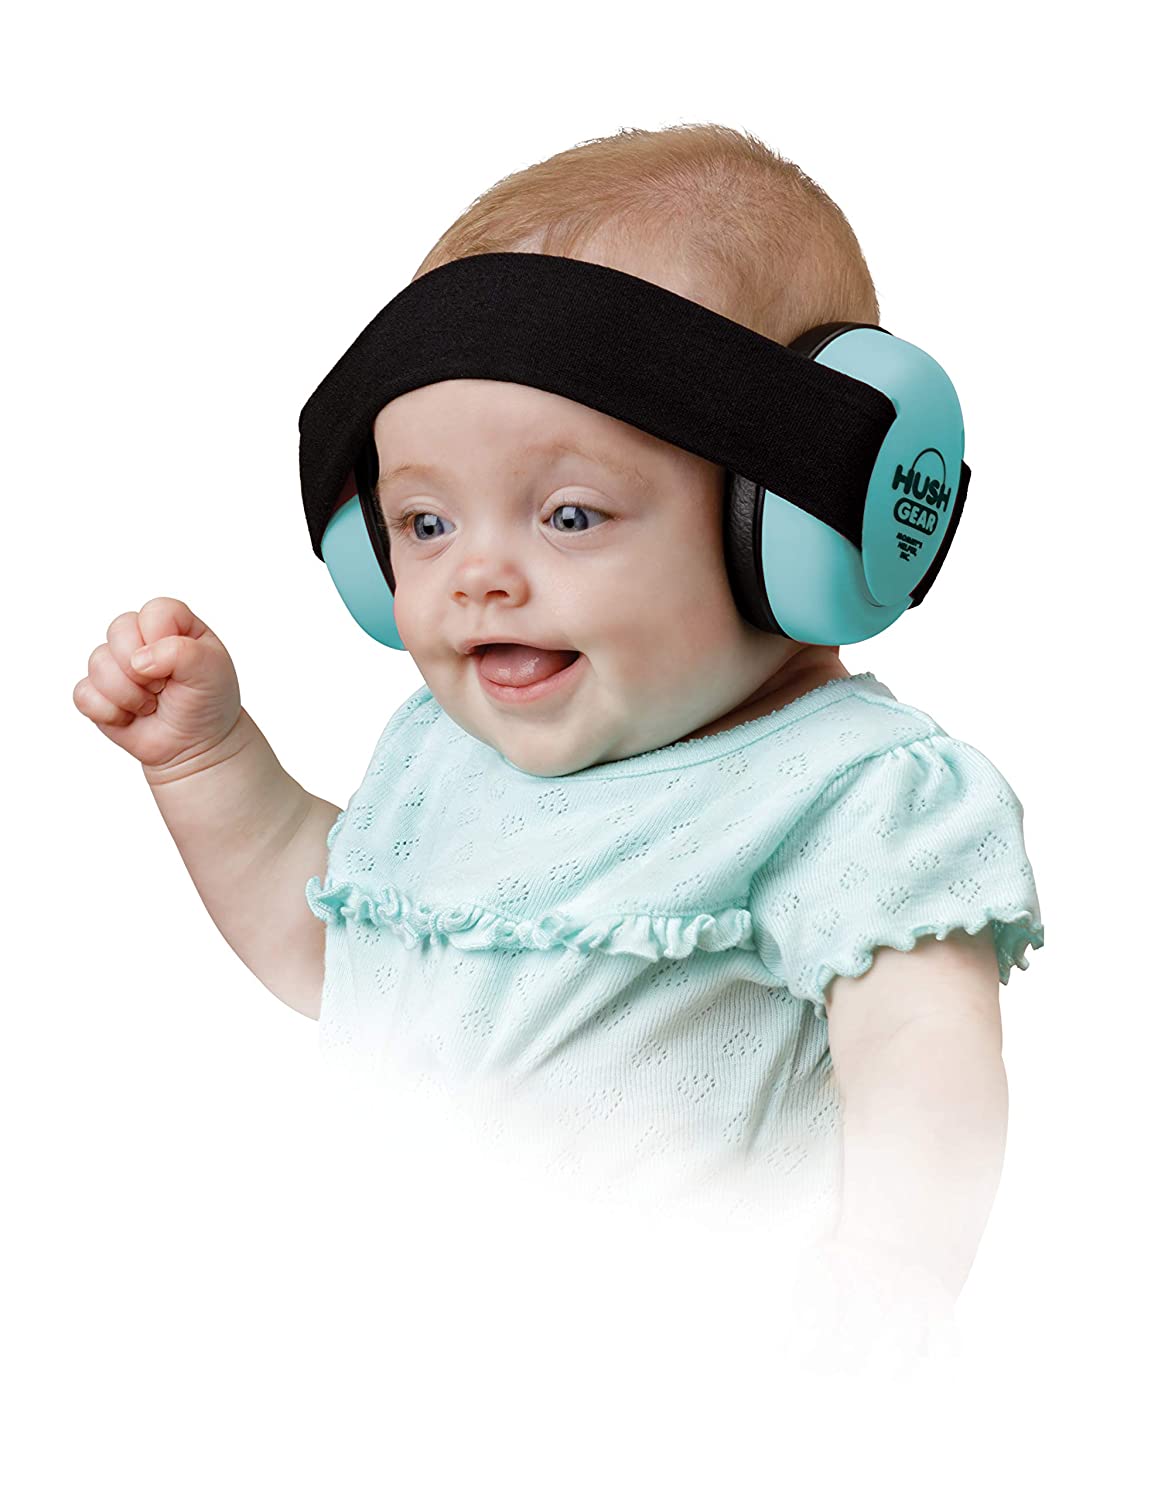 Mommy's Helper Hush Gear Noise Cancelling Headphones for Infants Ear Protection, Blue